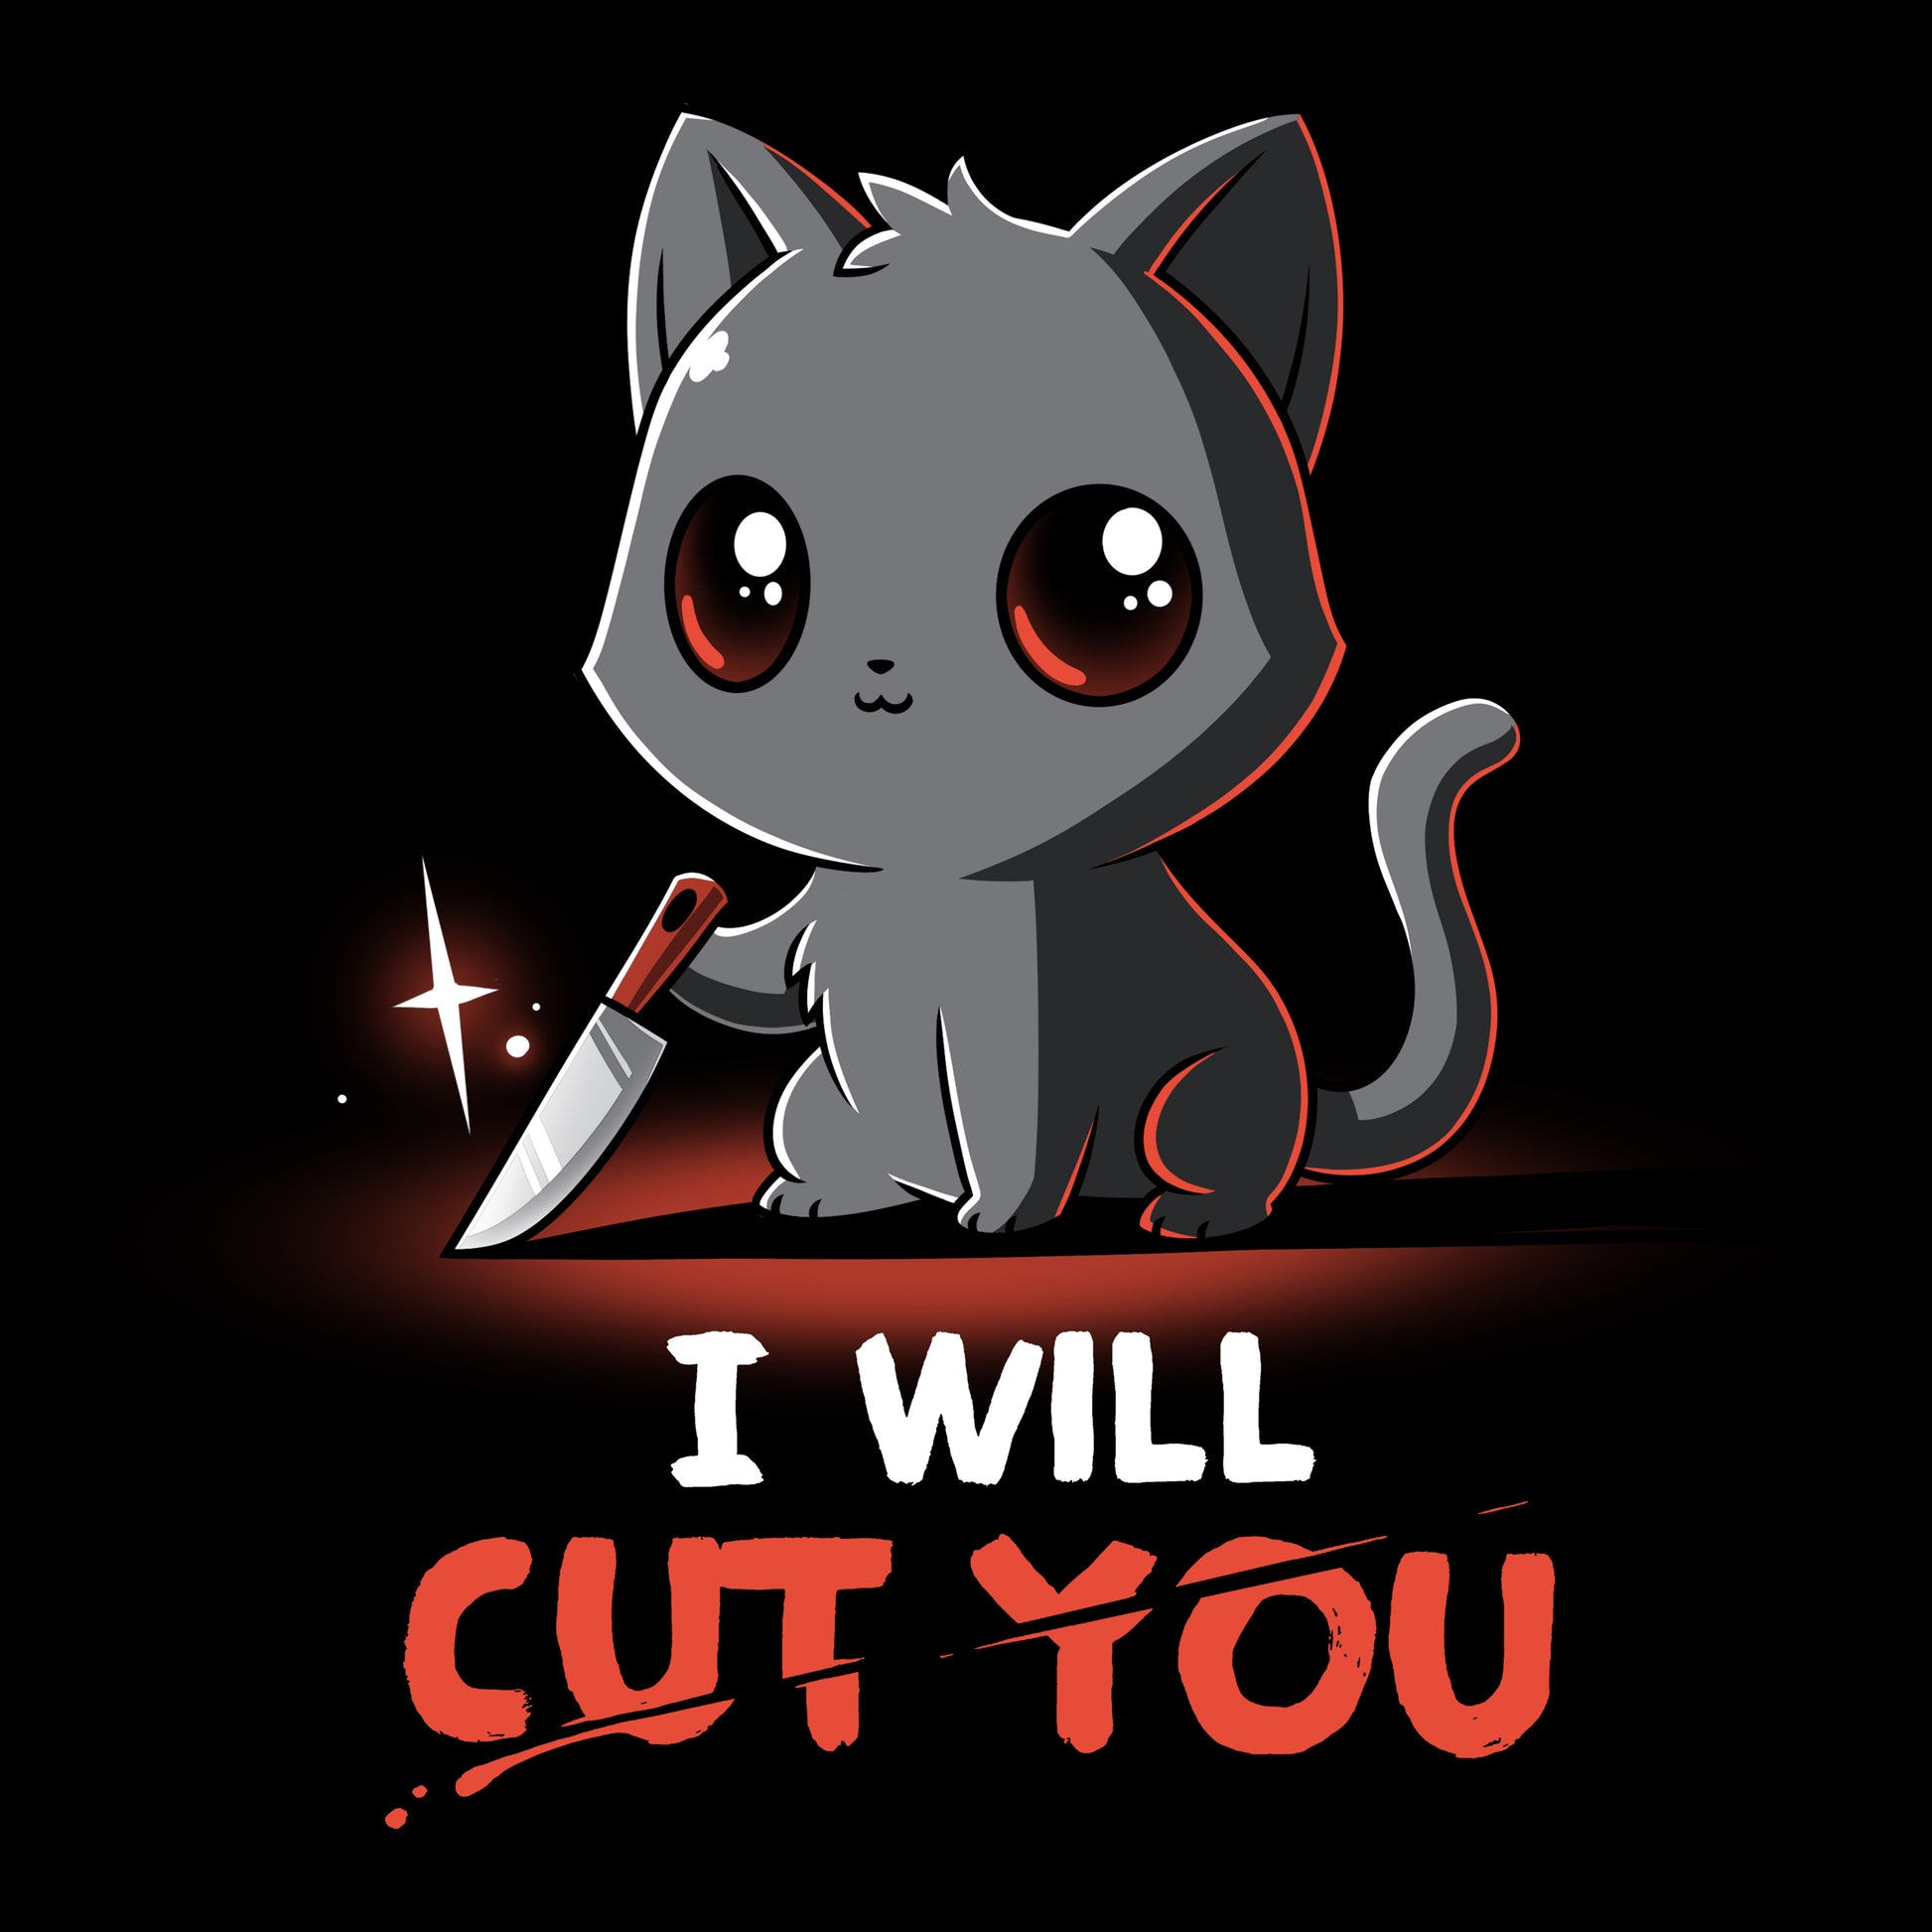 A cute T-shirt featuring Stabby the Kitty by TeeTurtle.